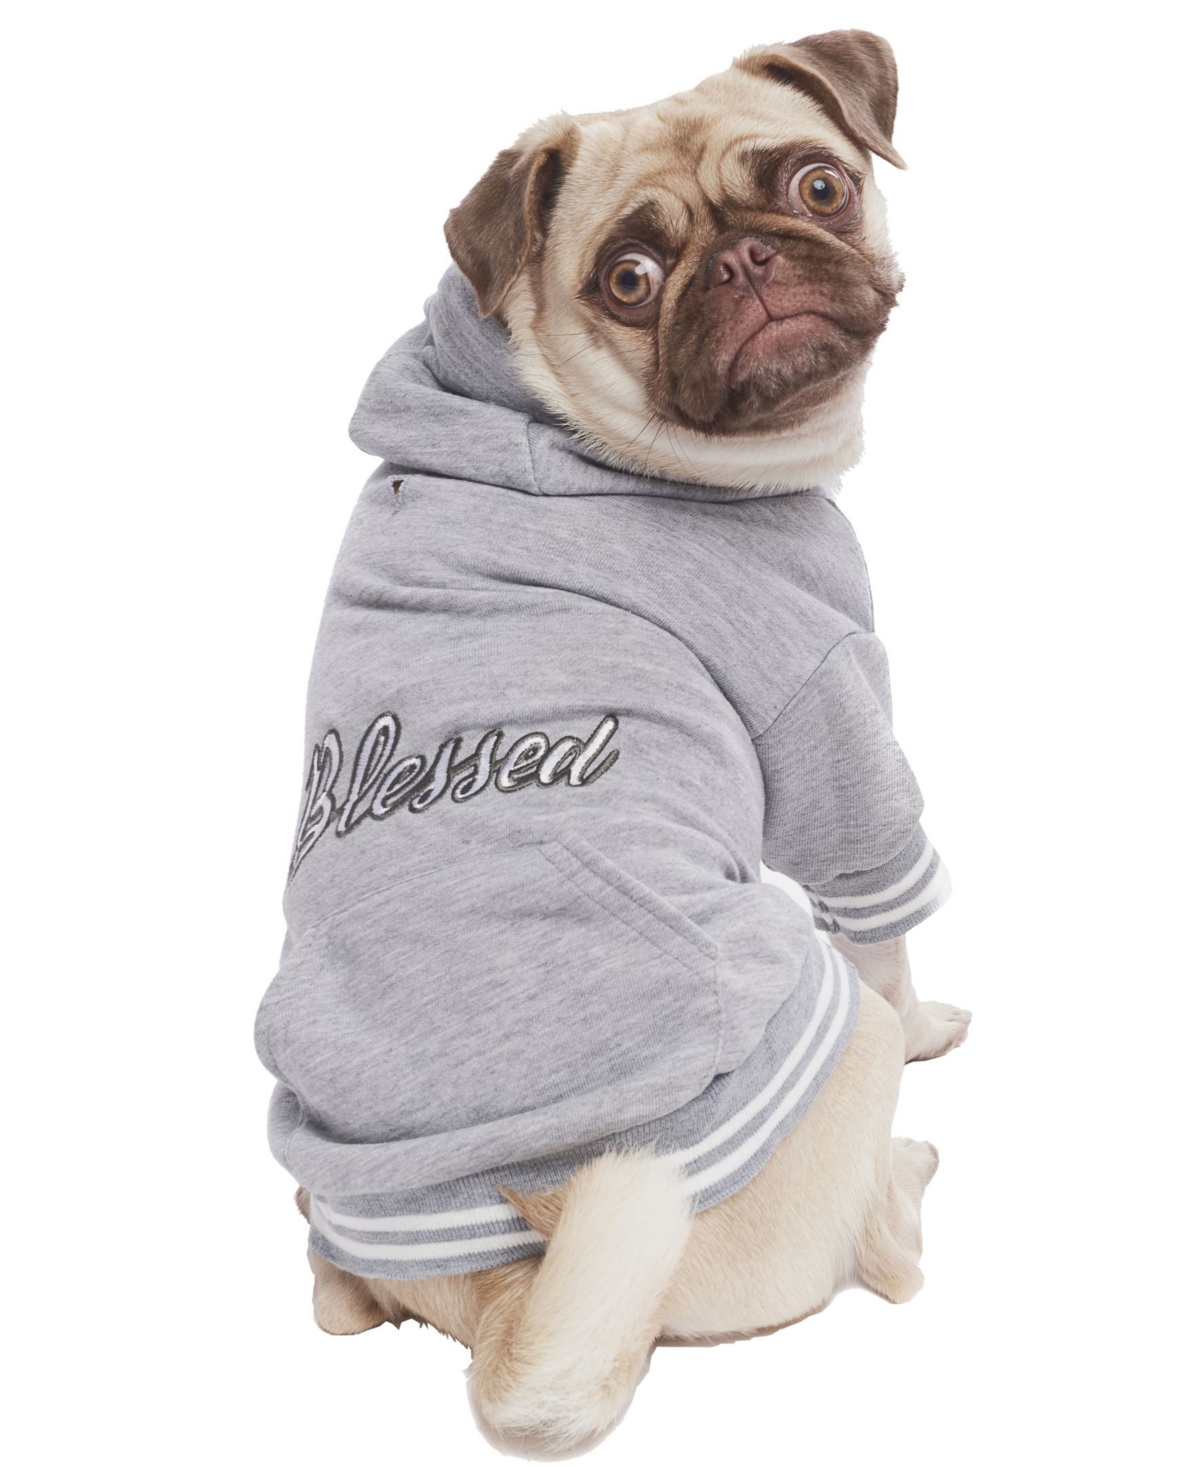 Blessed Dog Hoodie - Gray